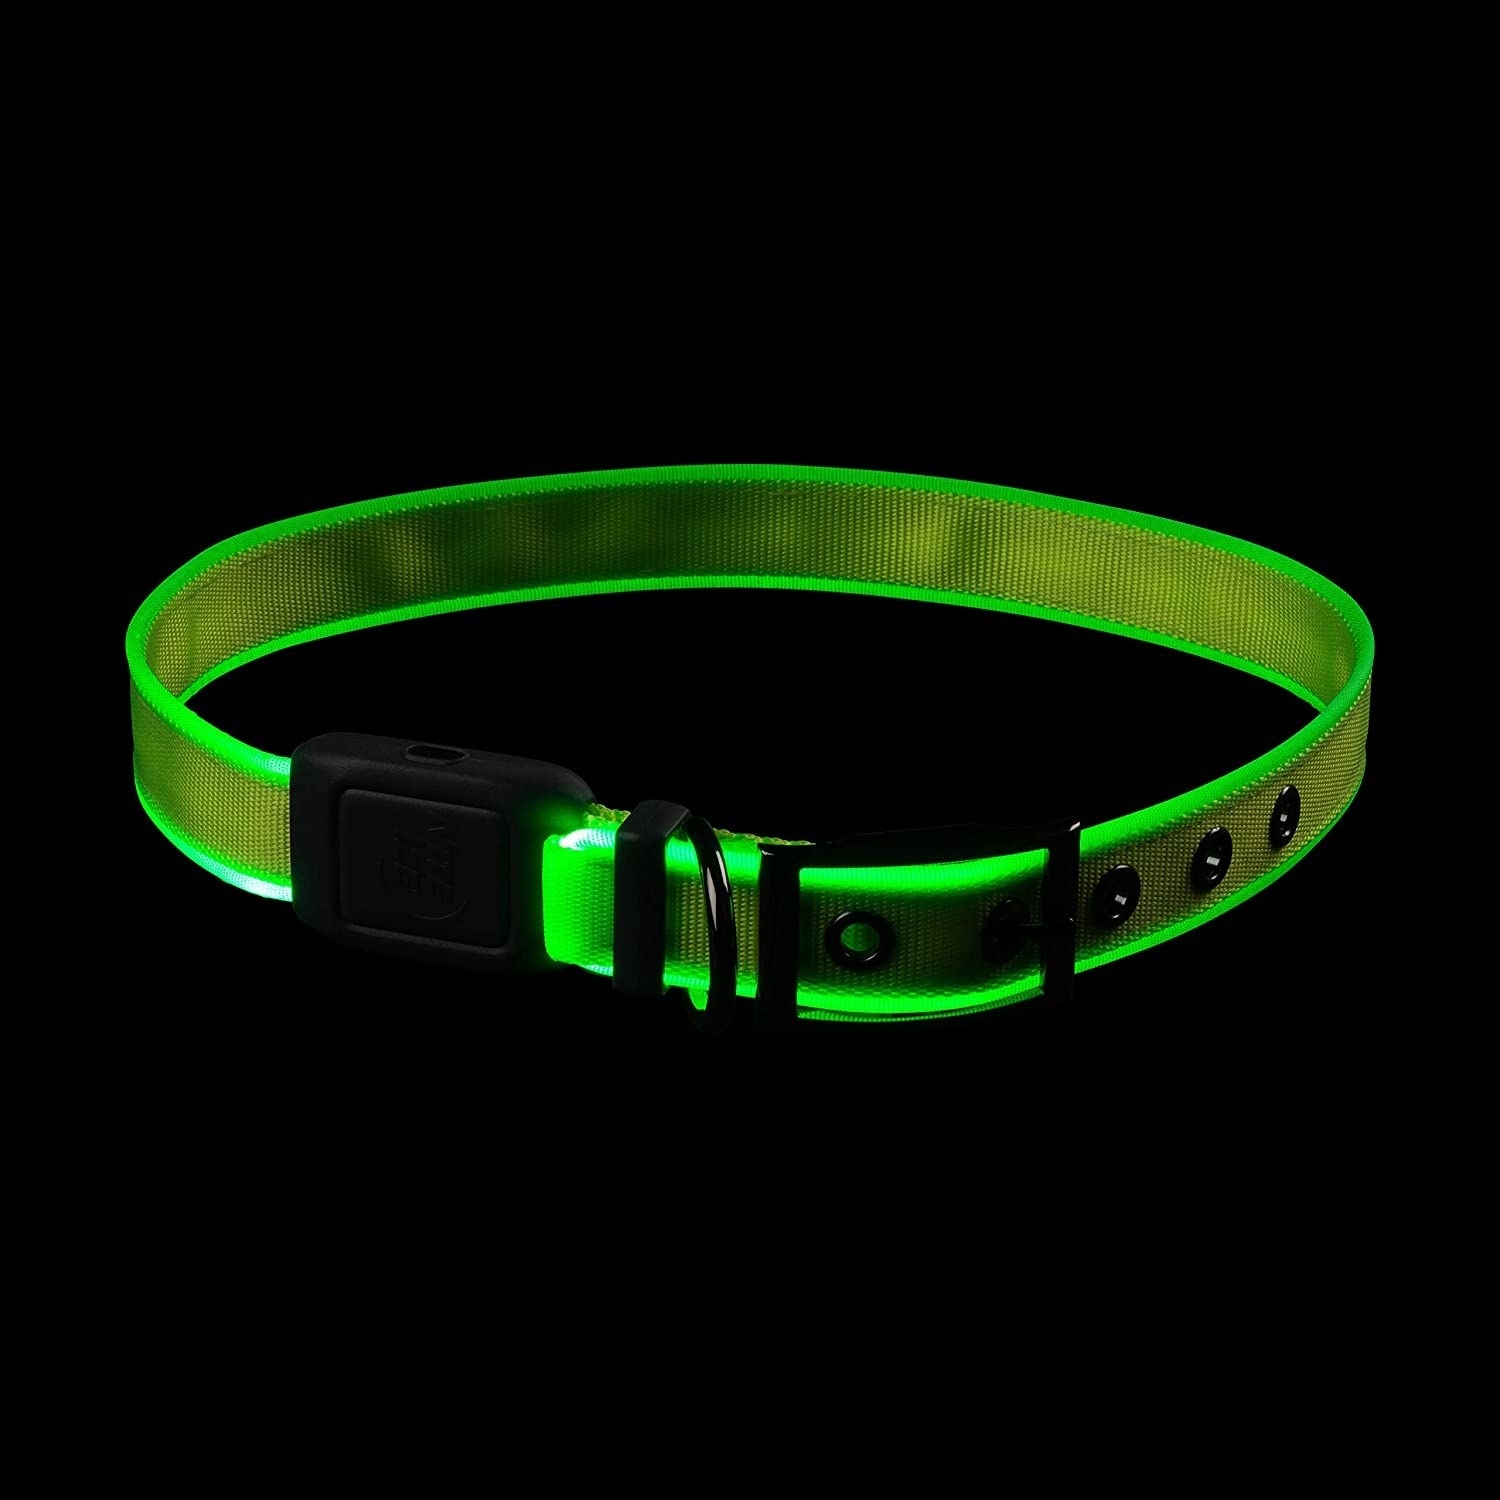 The lit-up collar on a dark background